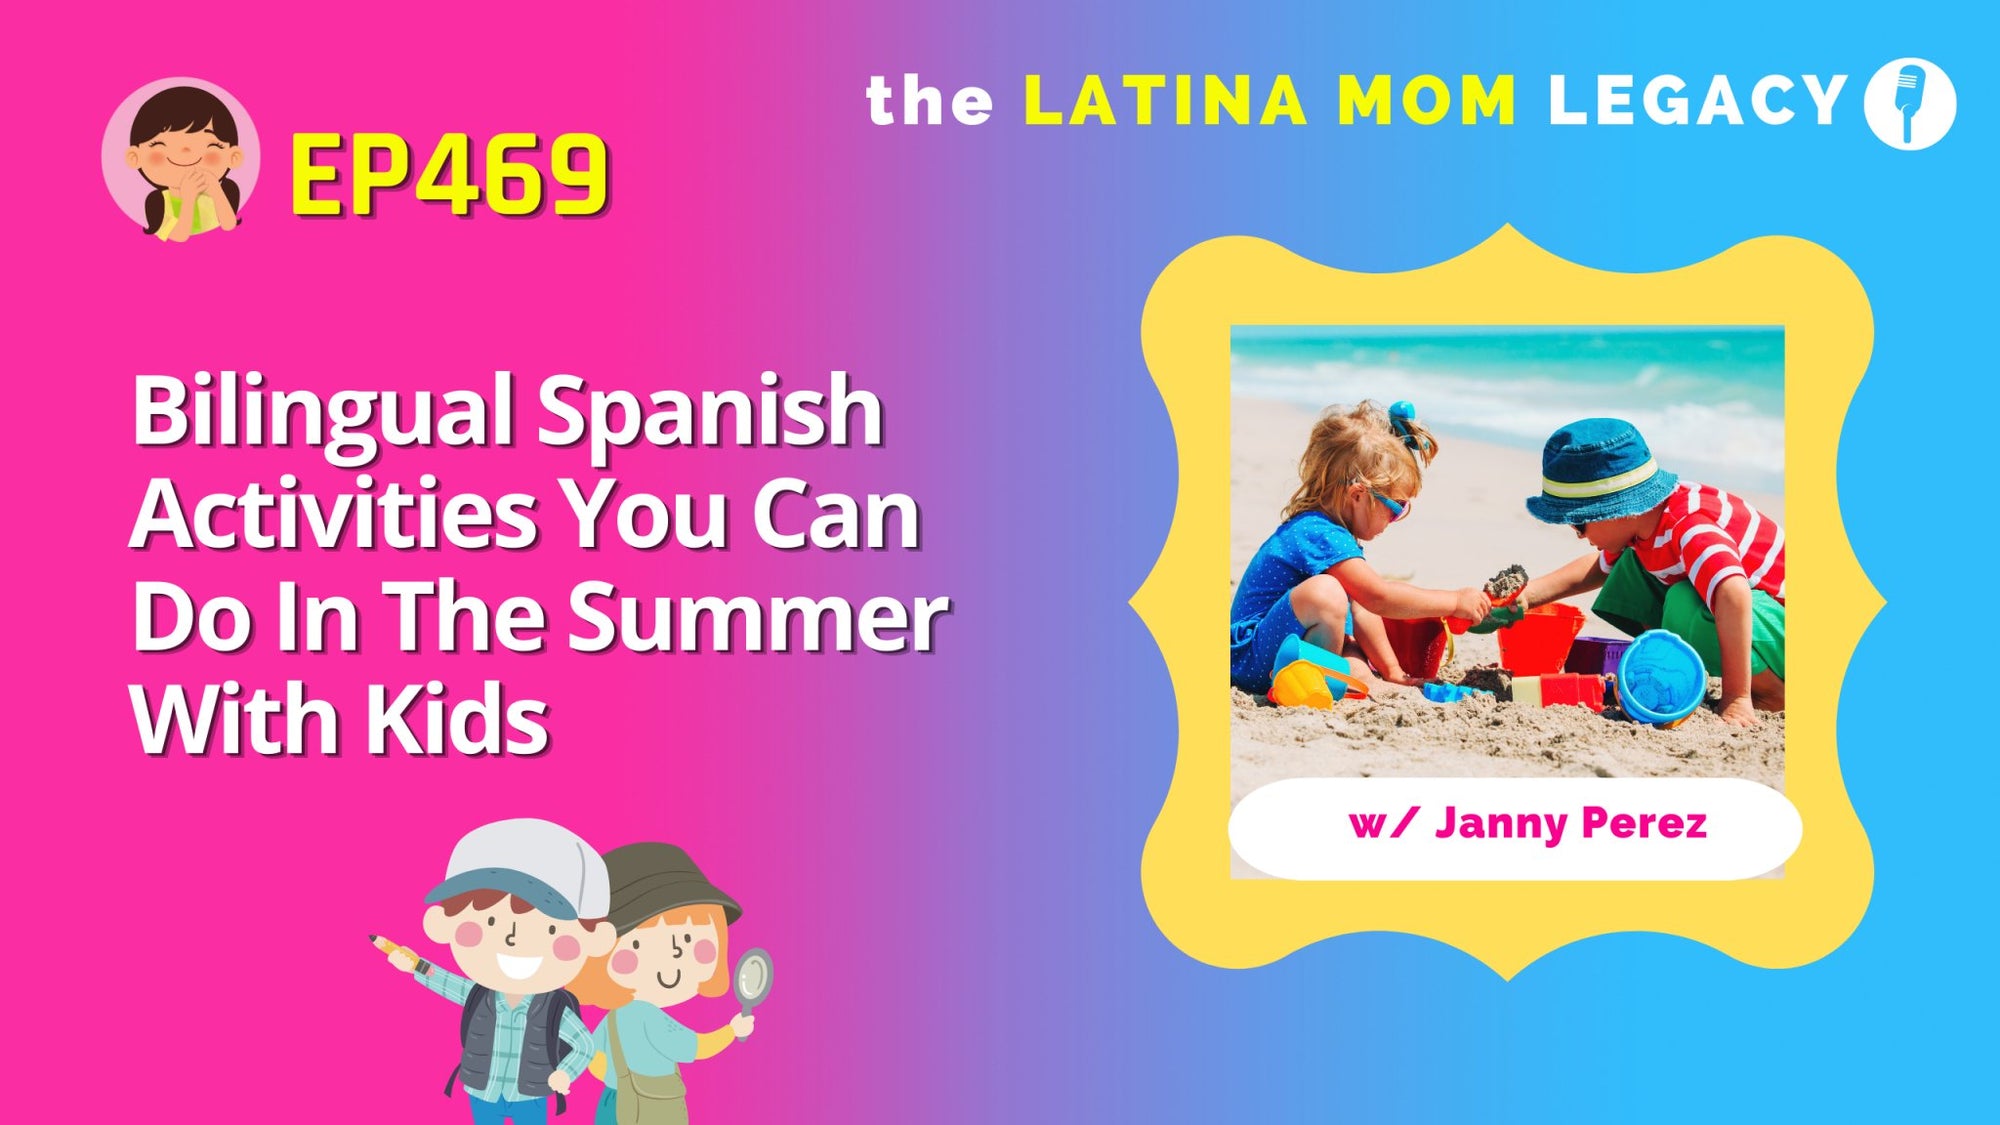 469 - Bilingual Spanish Activities You Can Do In The Summer - Mi LegaSi